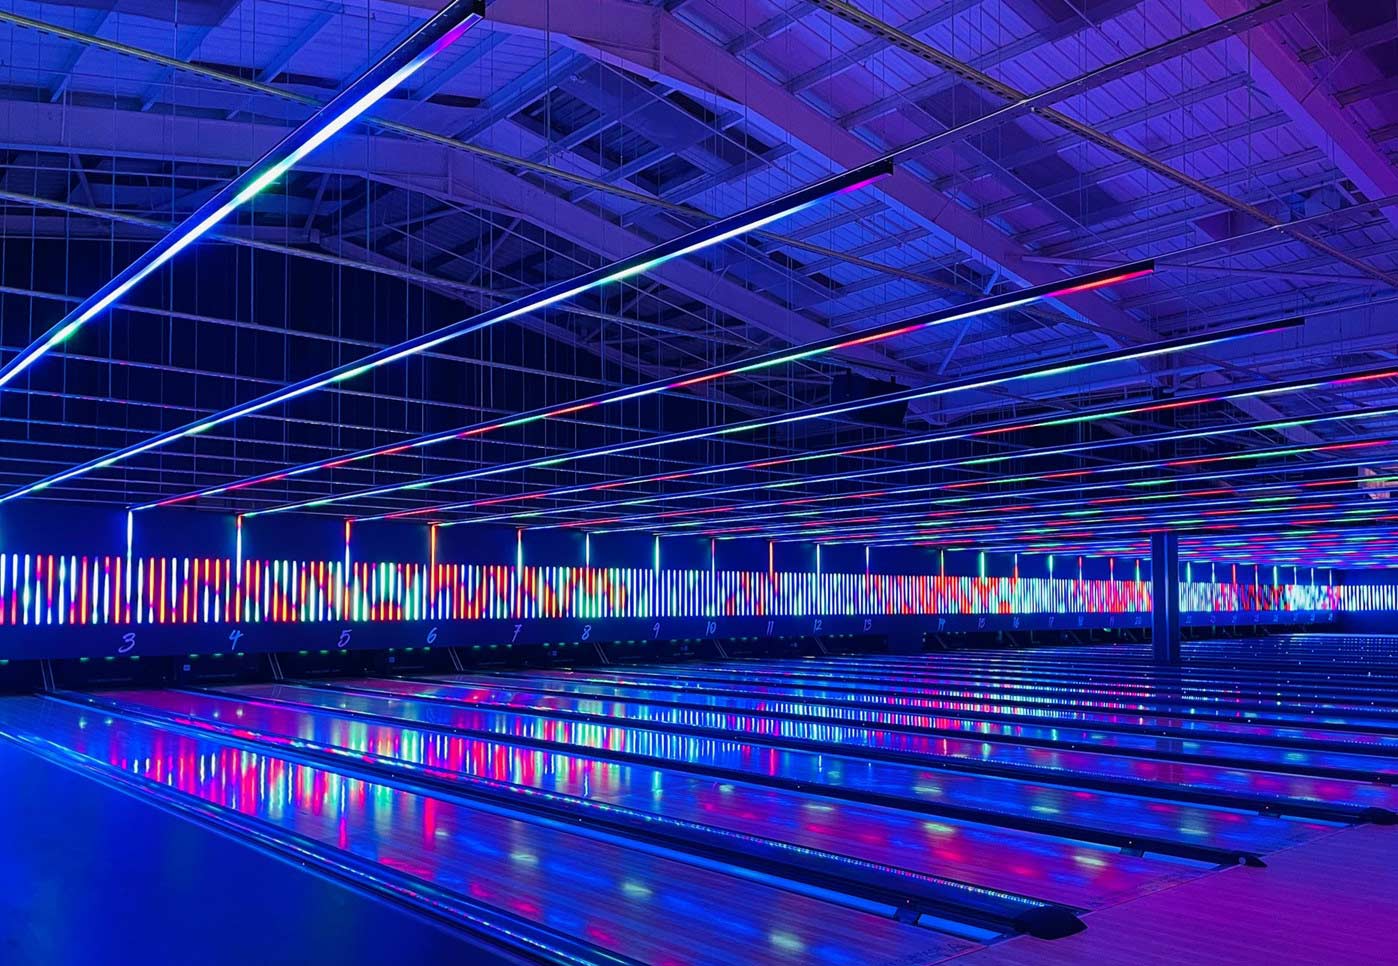 Sheffield Bowling Lanes And Lighting